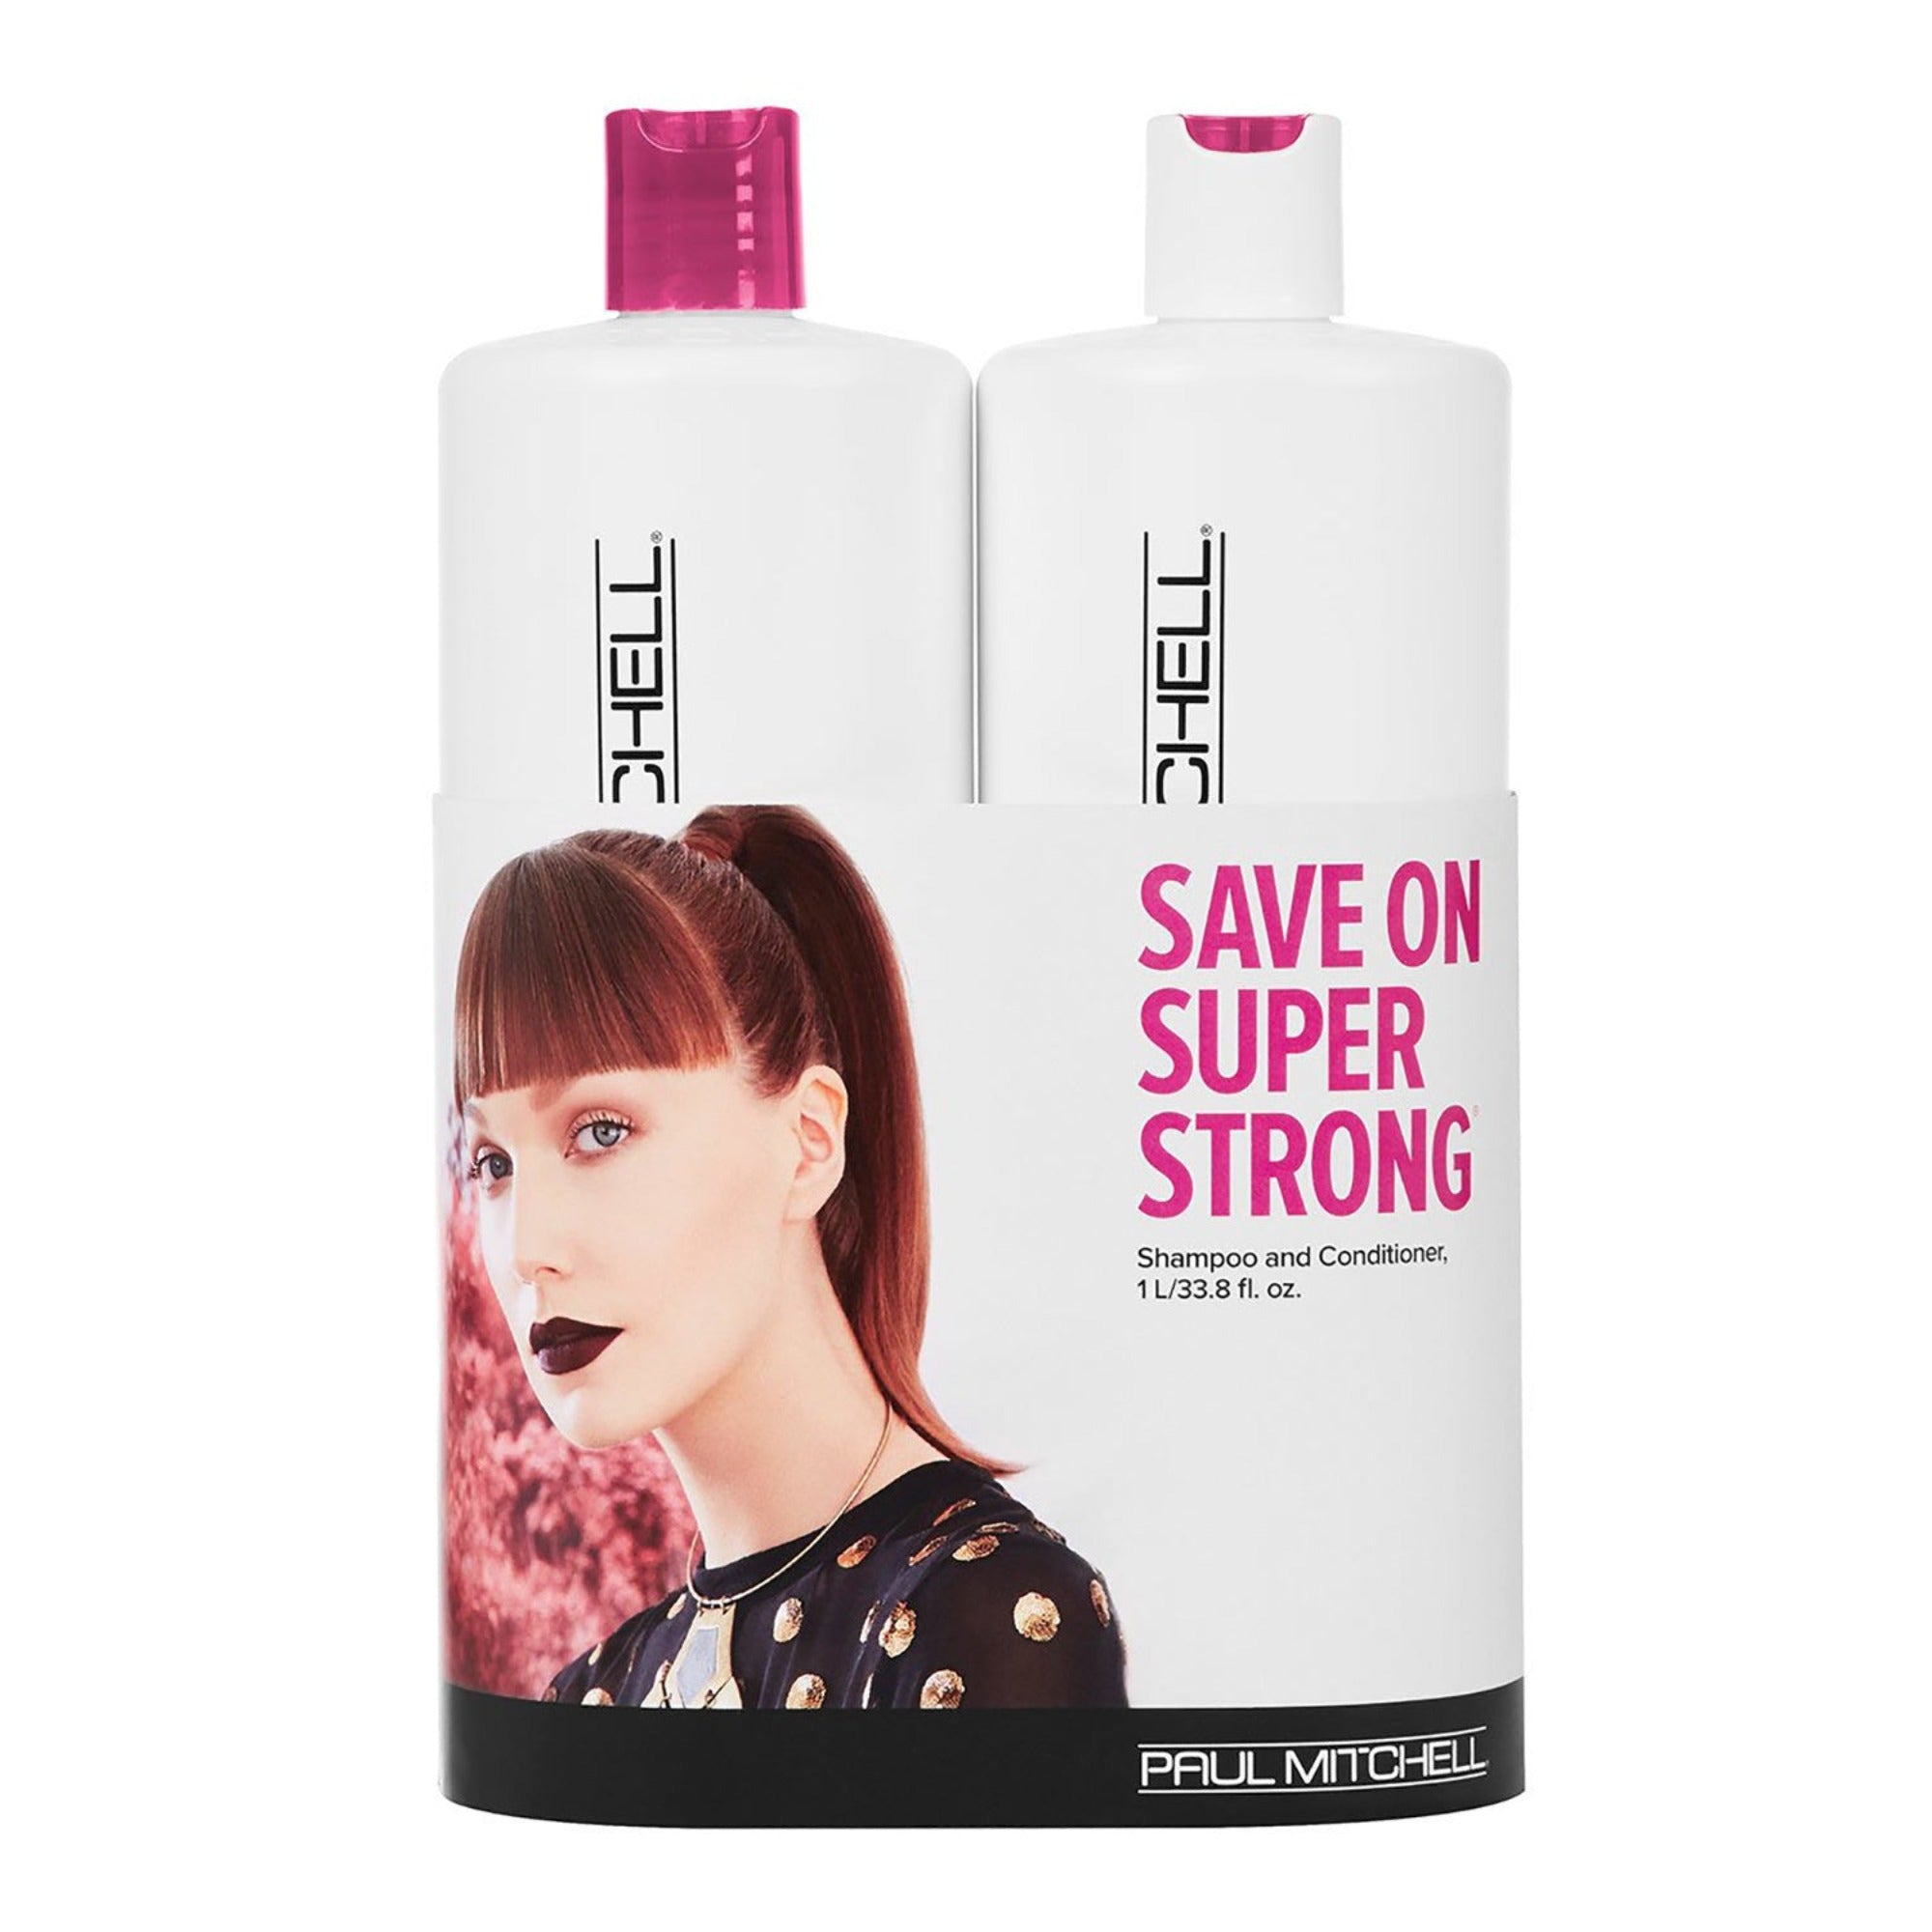 Paul Mitchell Strength Super Strong Shampoo & Conditioner Duo ($67.50 Value) / LITER